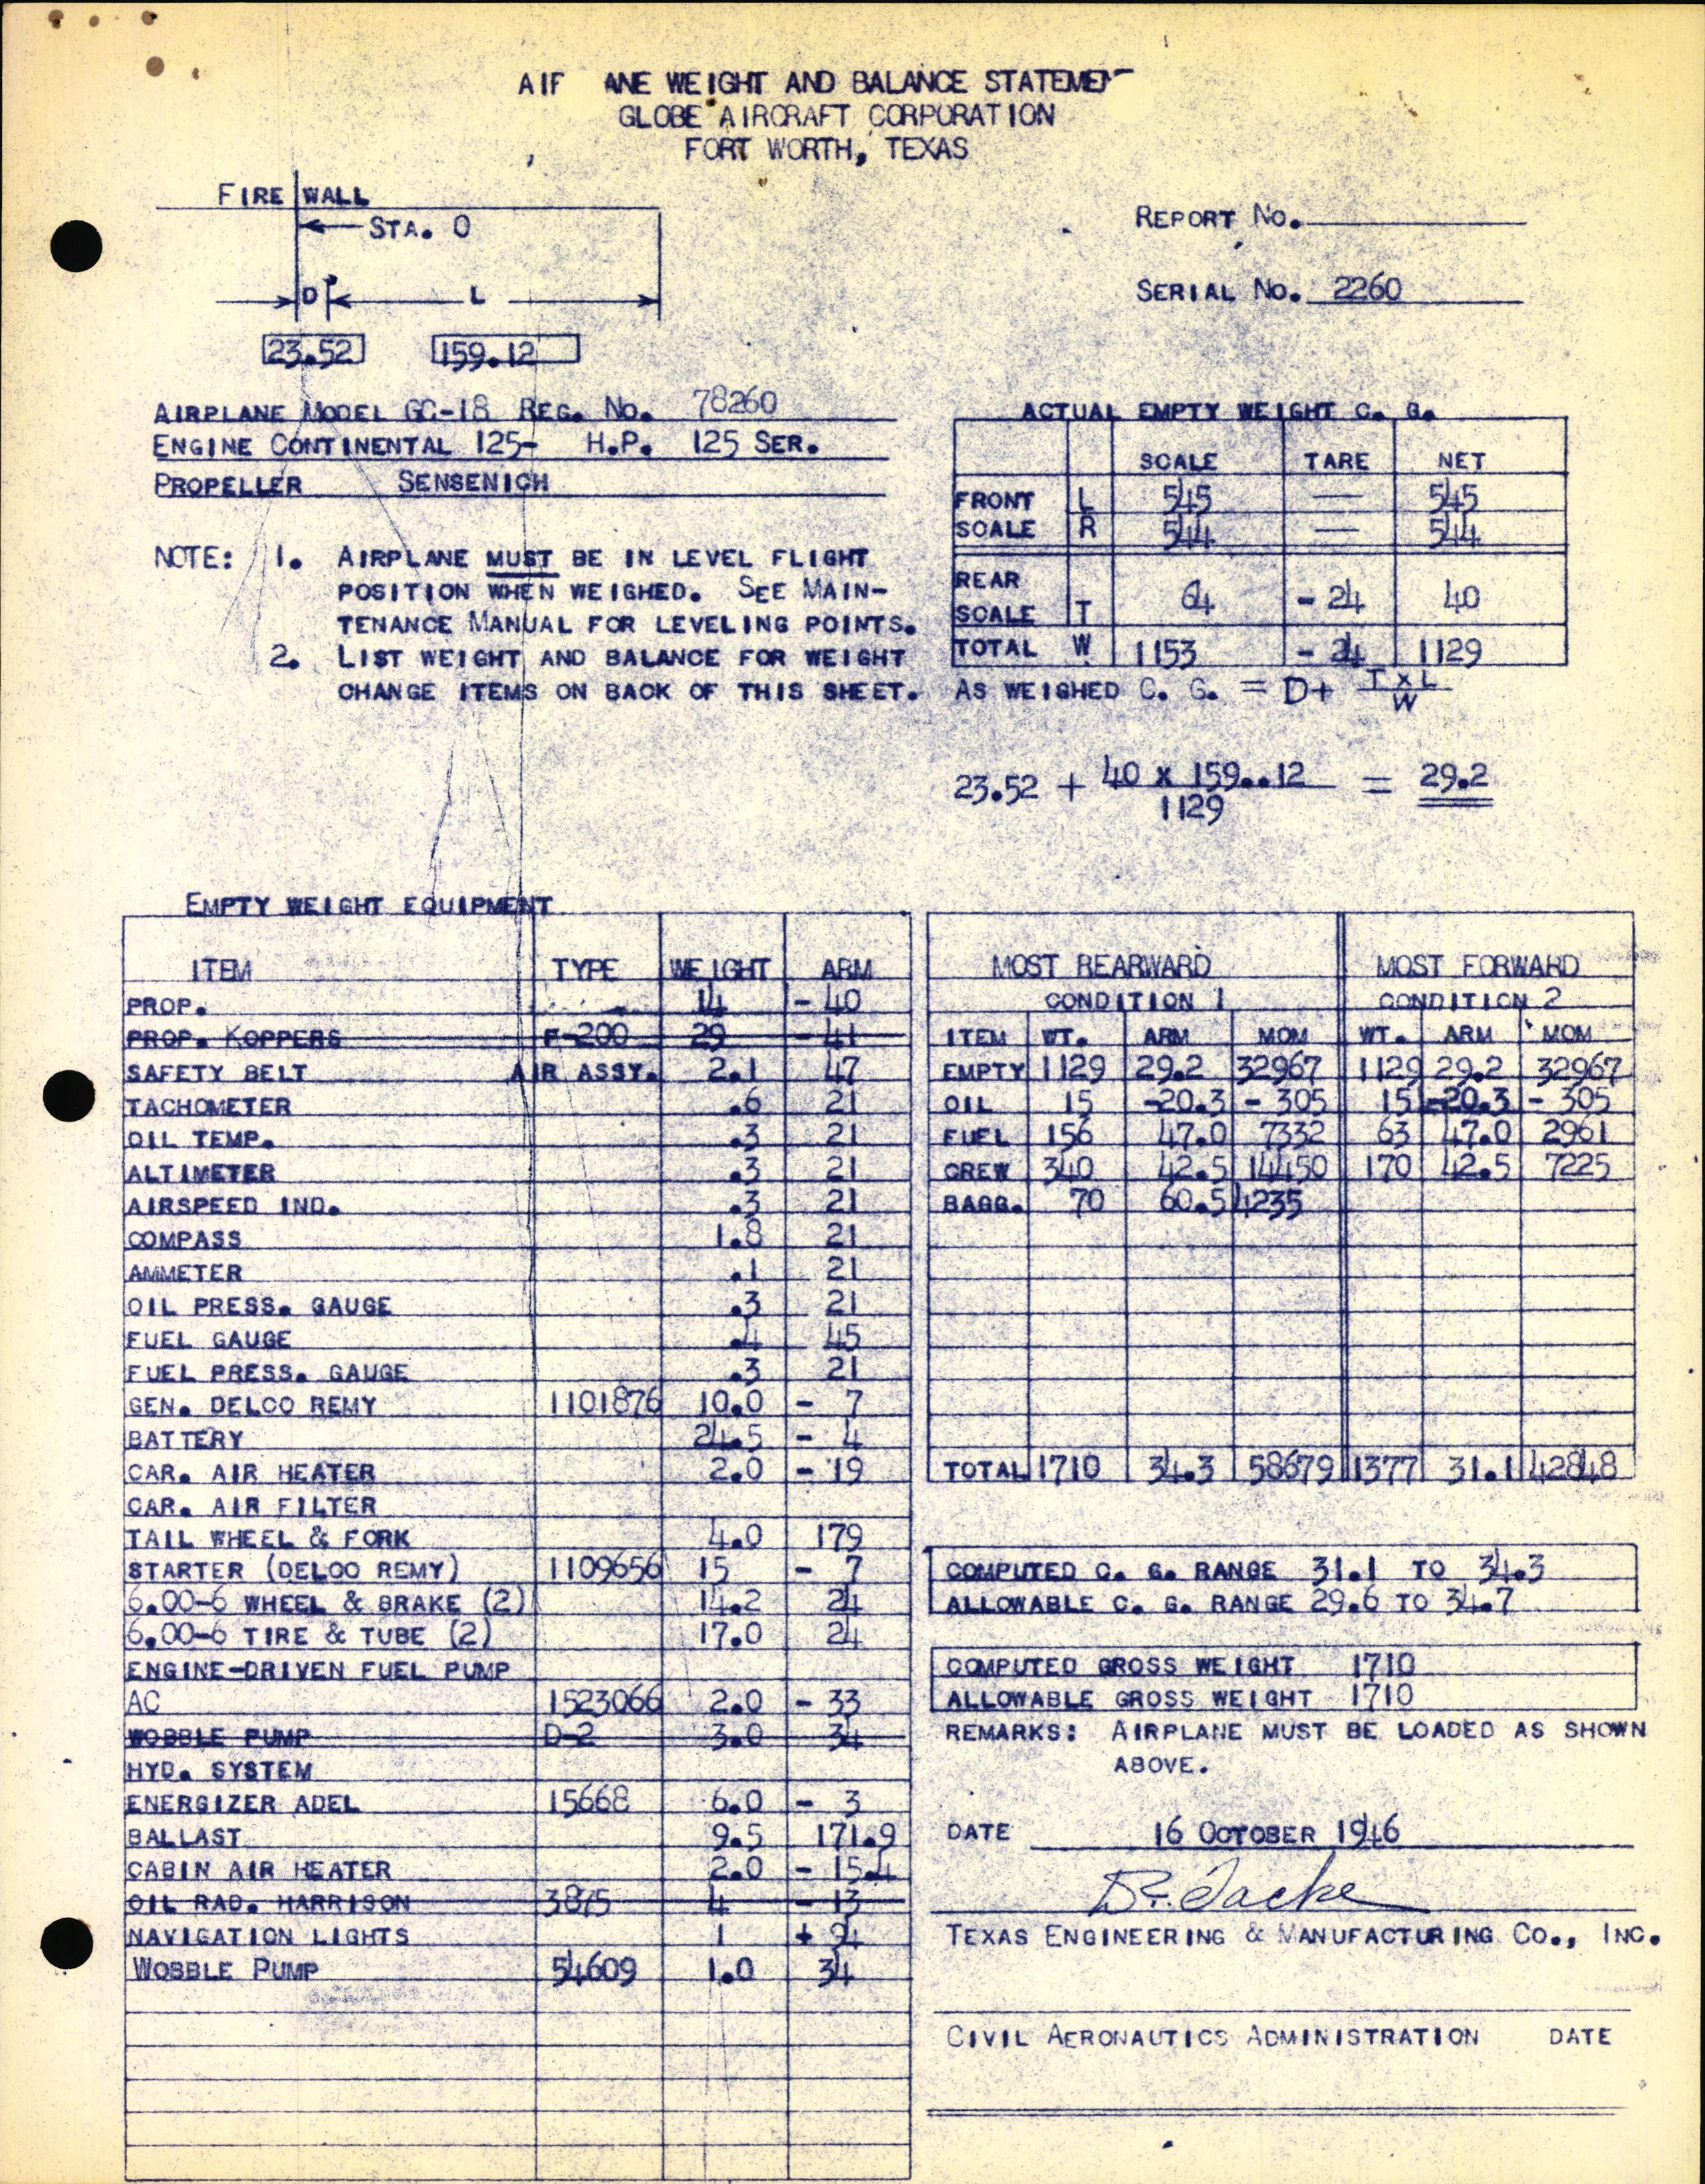 Sample page 3 from AirCorps Library document: Technical Information for Serial Number 2260